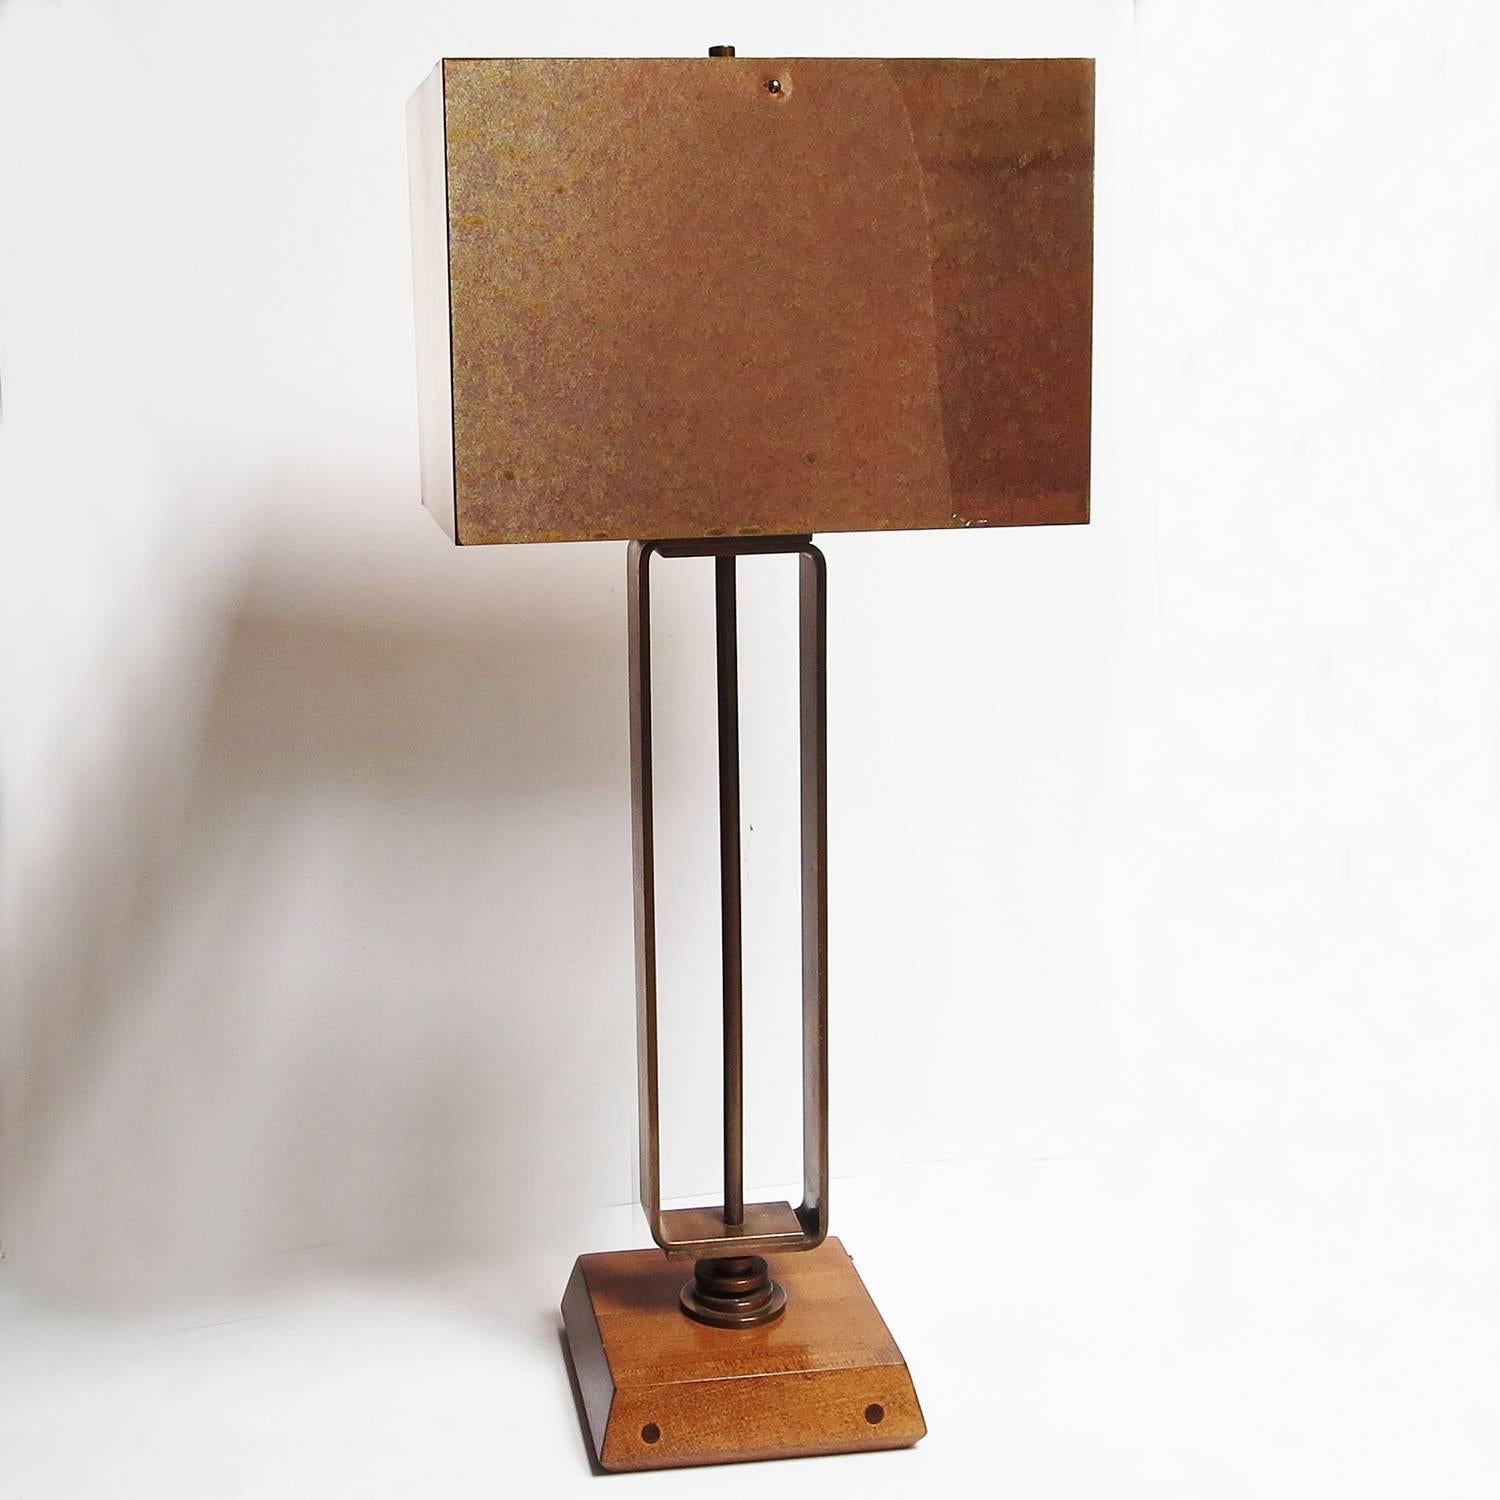 This great pair of lamps, by unknown creator, recall the designs of Donald Deskey or Gilbert Rohde. The shades are thin copper sheet, folded into form. The bases are a heavy weight copper bar, curved to meet at the bottom. The bases are refinished